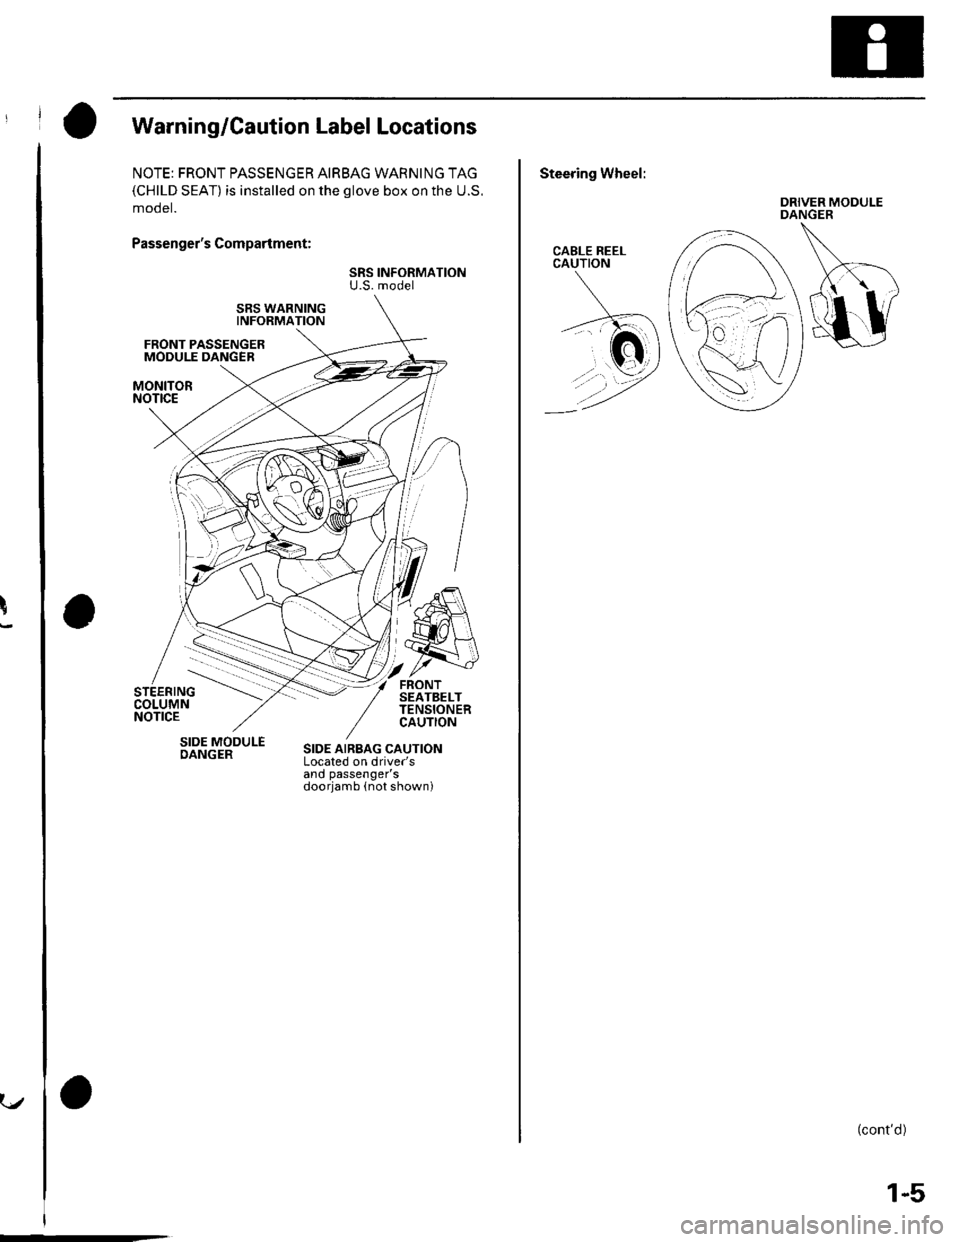 HONDA CIVIC 2002 7.G Workshop Manual !
..r
, I O warning/cautionLabelLocations
NOTE: FRONT PASSENGER AIRBAG WARNING TAG(CHILD SEAT) is installed on the glove box on the U.S.
mooet.
Passengers Compartment:
SRS INFORMATIONU.S. model
SRS 